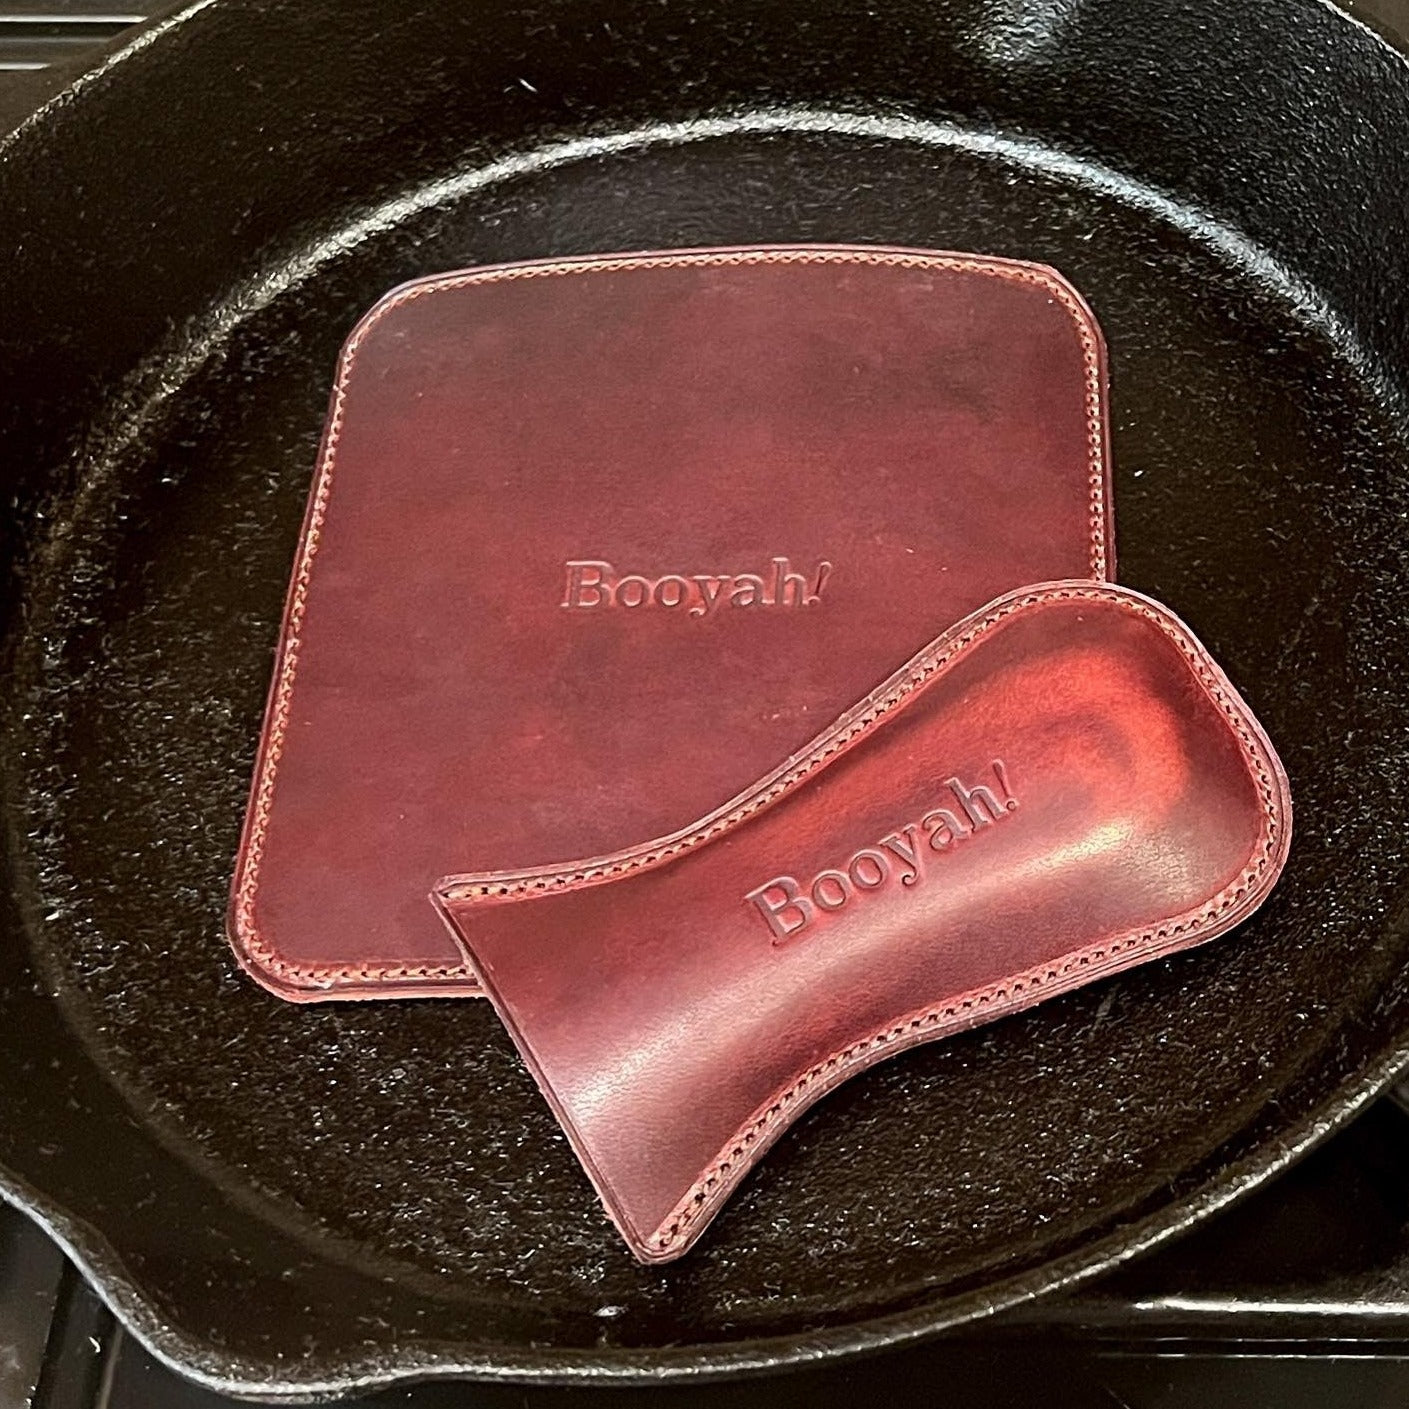 Booyah baby!  Cast Iron Skillet Handle Covers in Horween leather.  Handmade to order in Houston, TX.